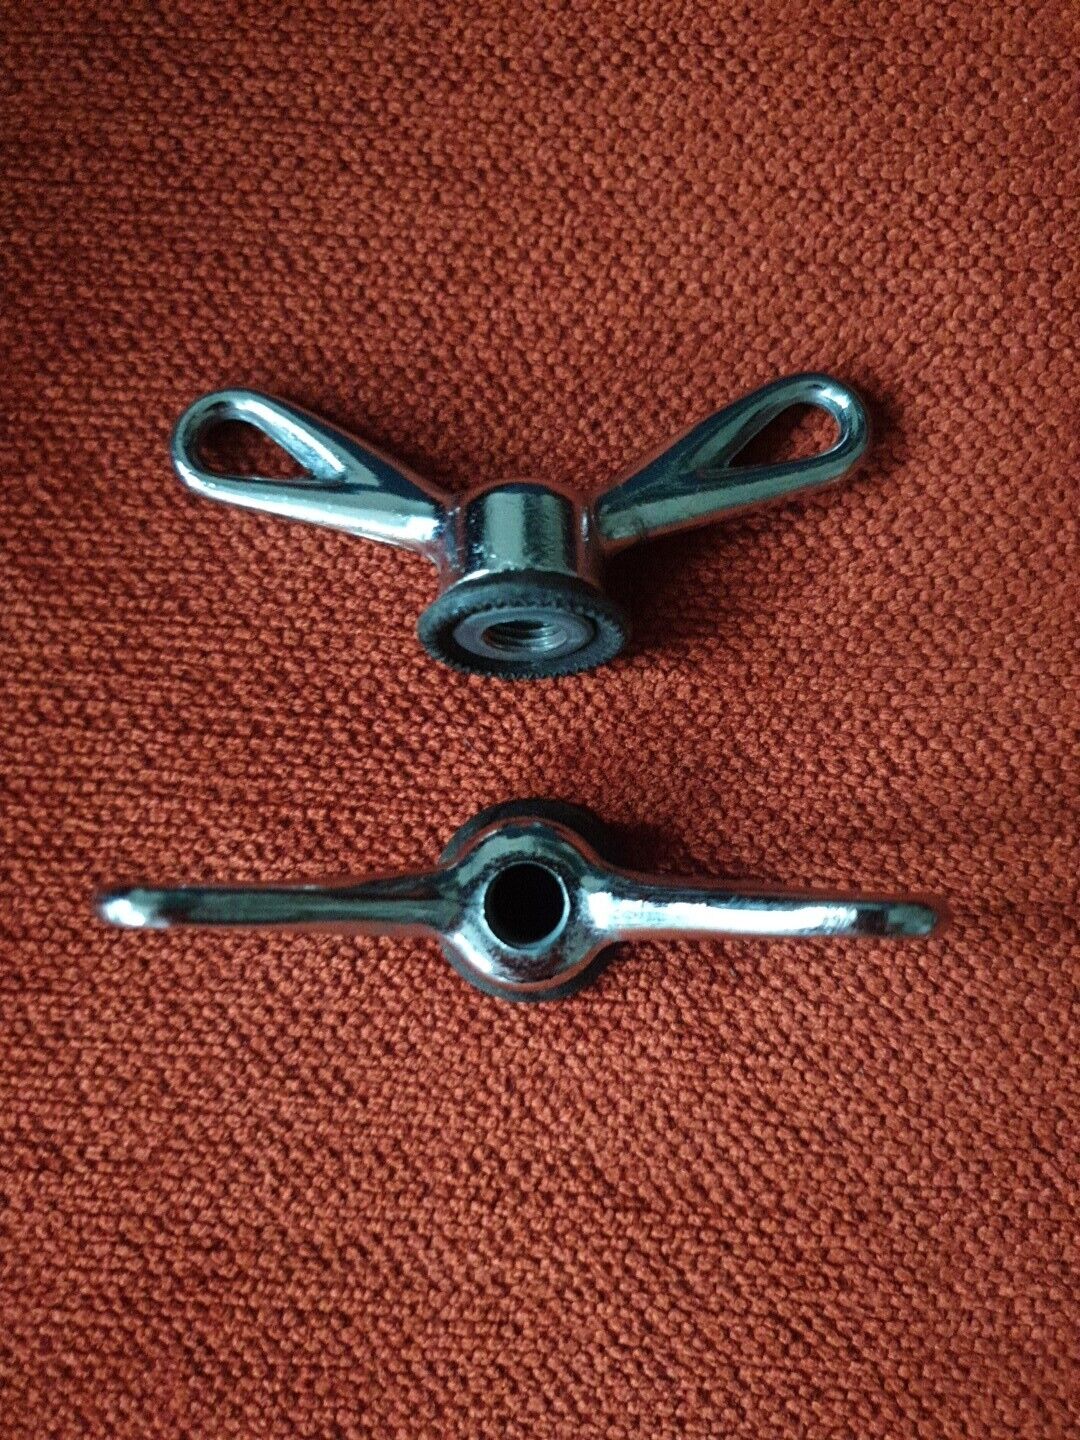 Vintage 1940s/50s Chrome Cycle Front Wing Nuts 